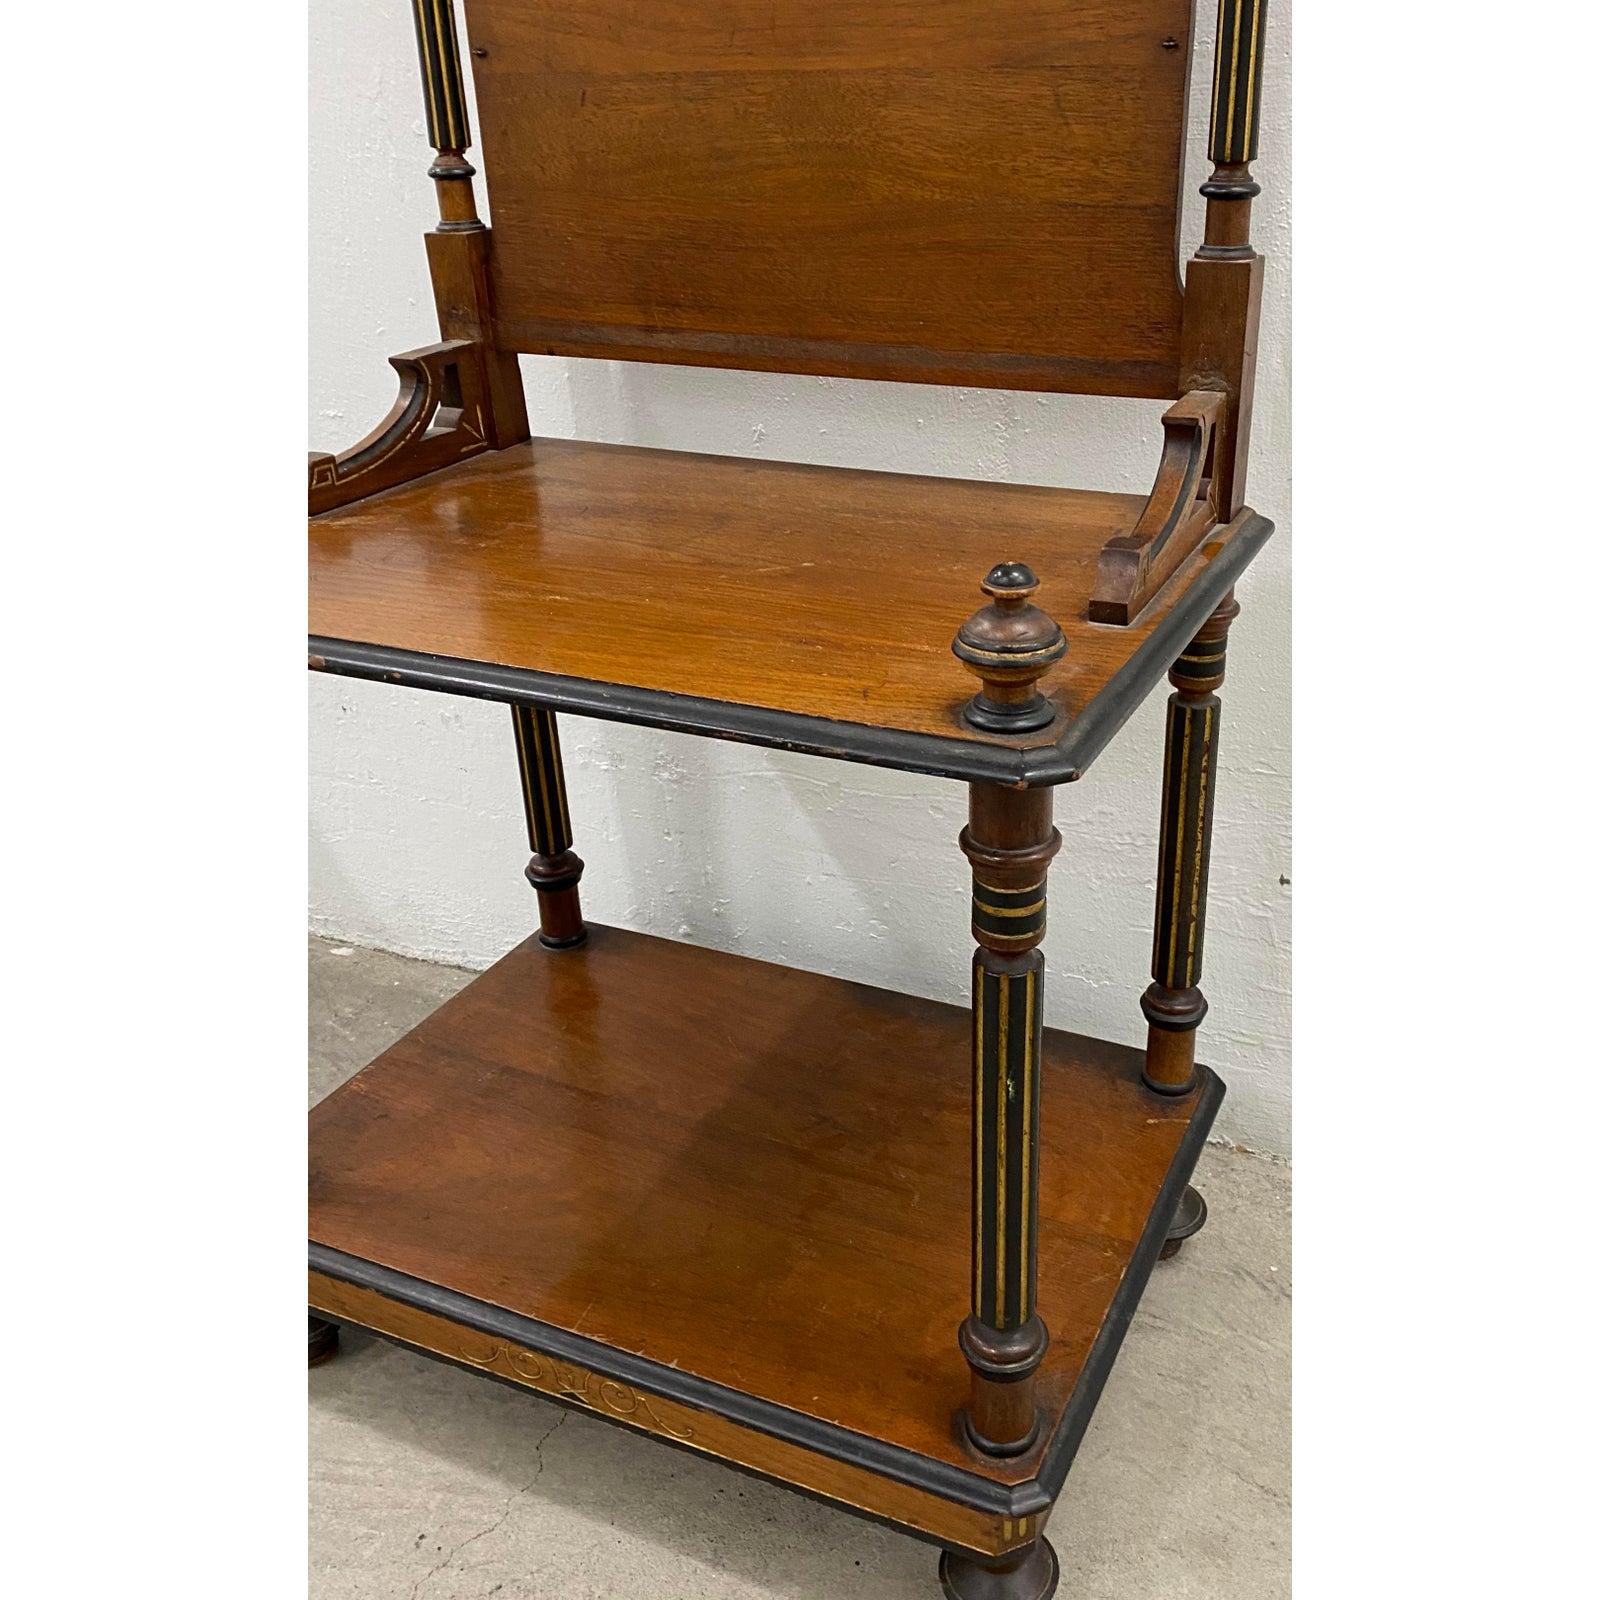 Hand-Crafted 19th Century English Mahogany Server / Console Table